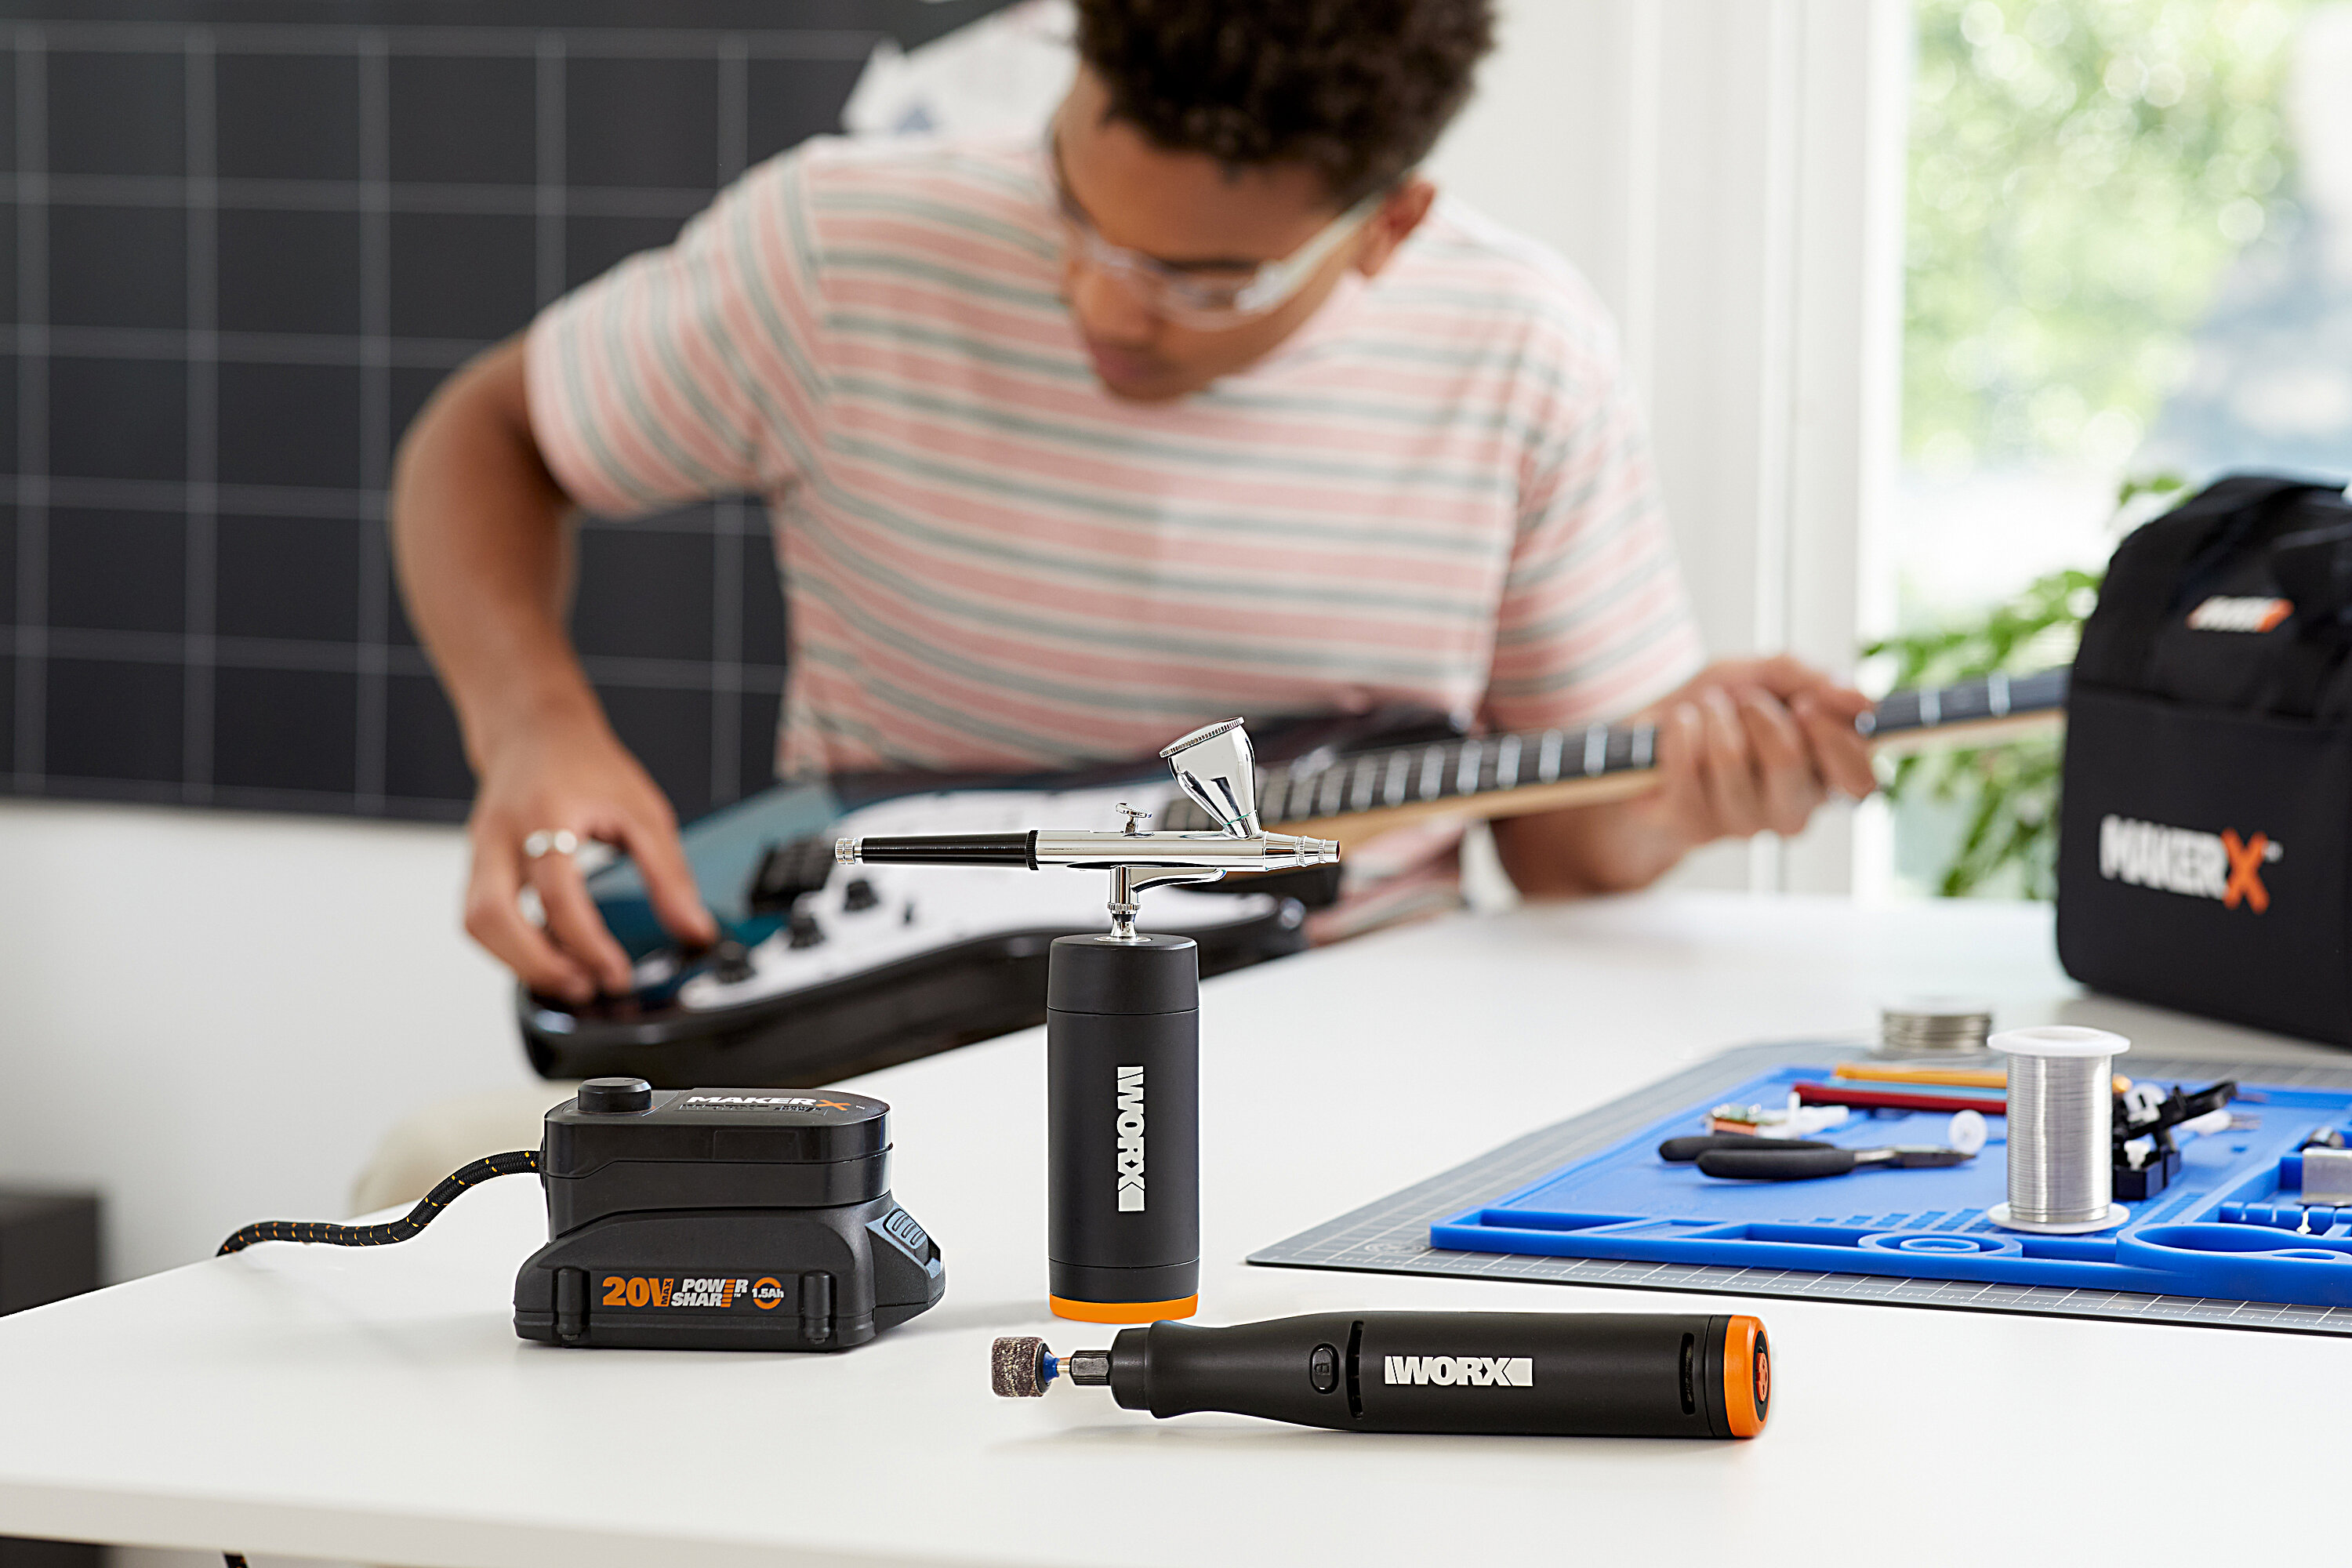 WORX MakerX Hub enables users to easily transport crafting tools to various work stations and project locations without need for electrical outlets.